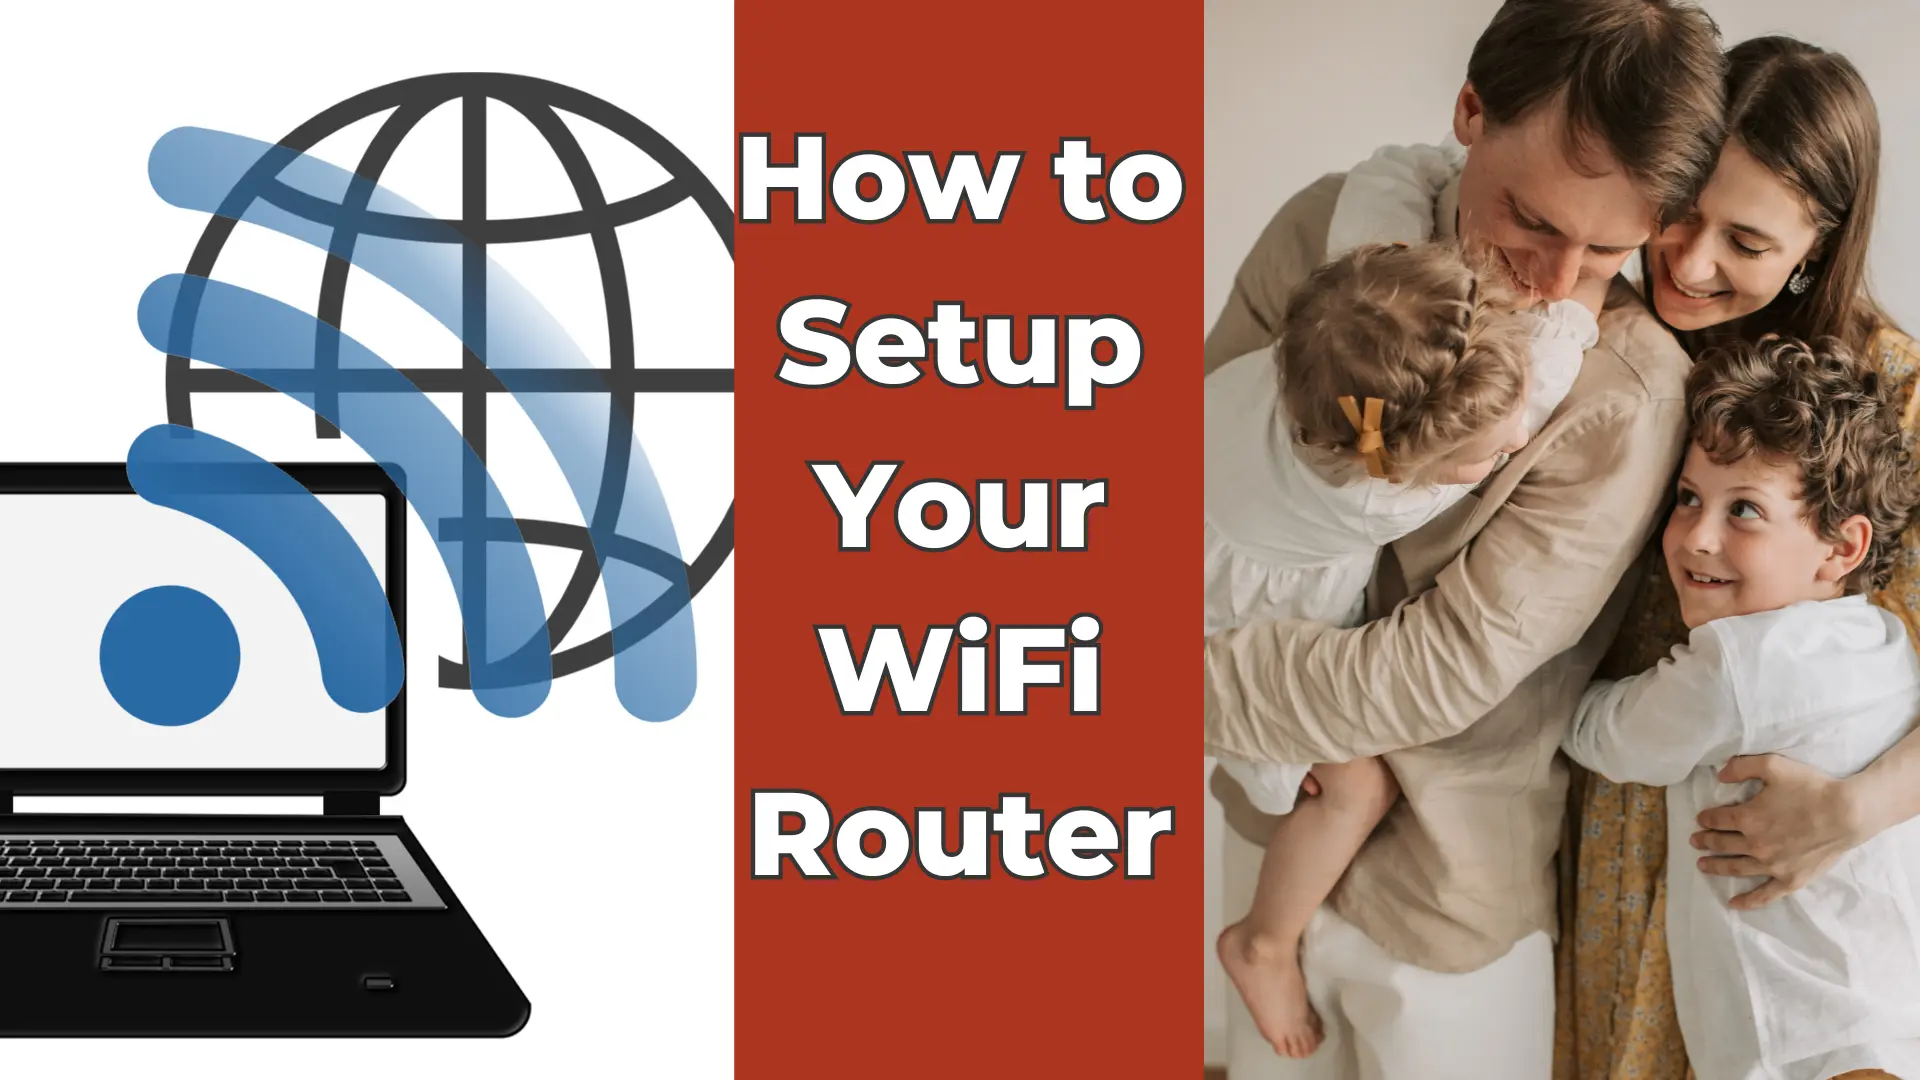 How to Setup Your WiFi Router